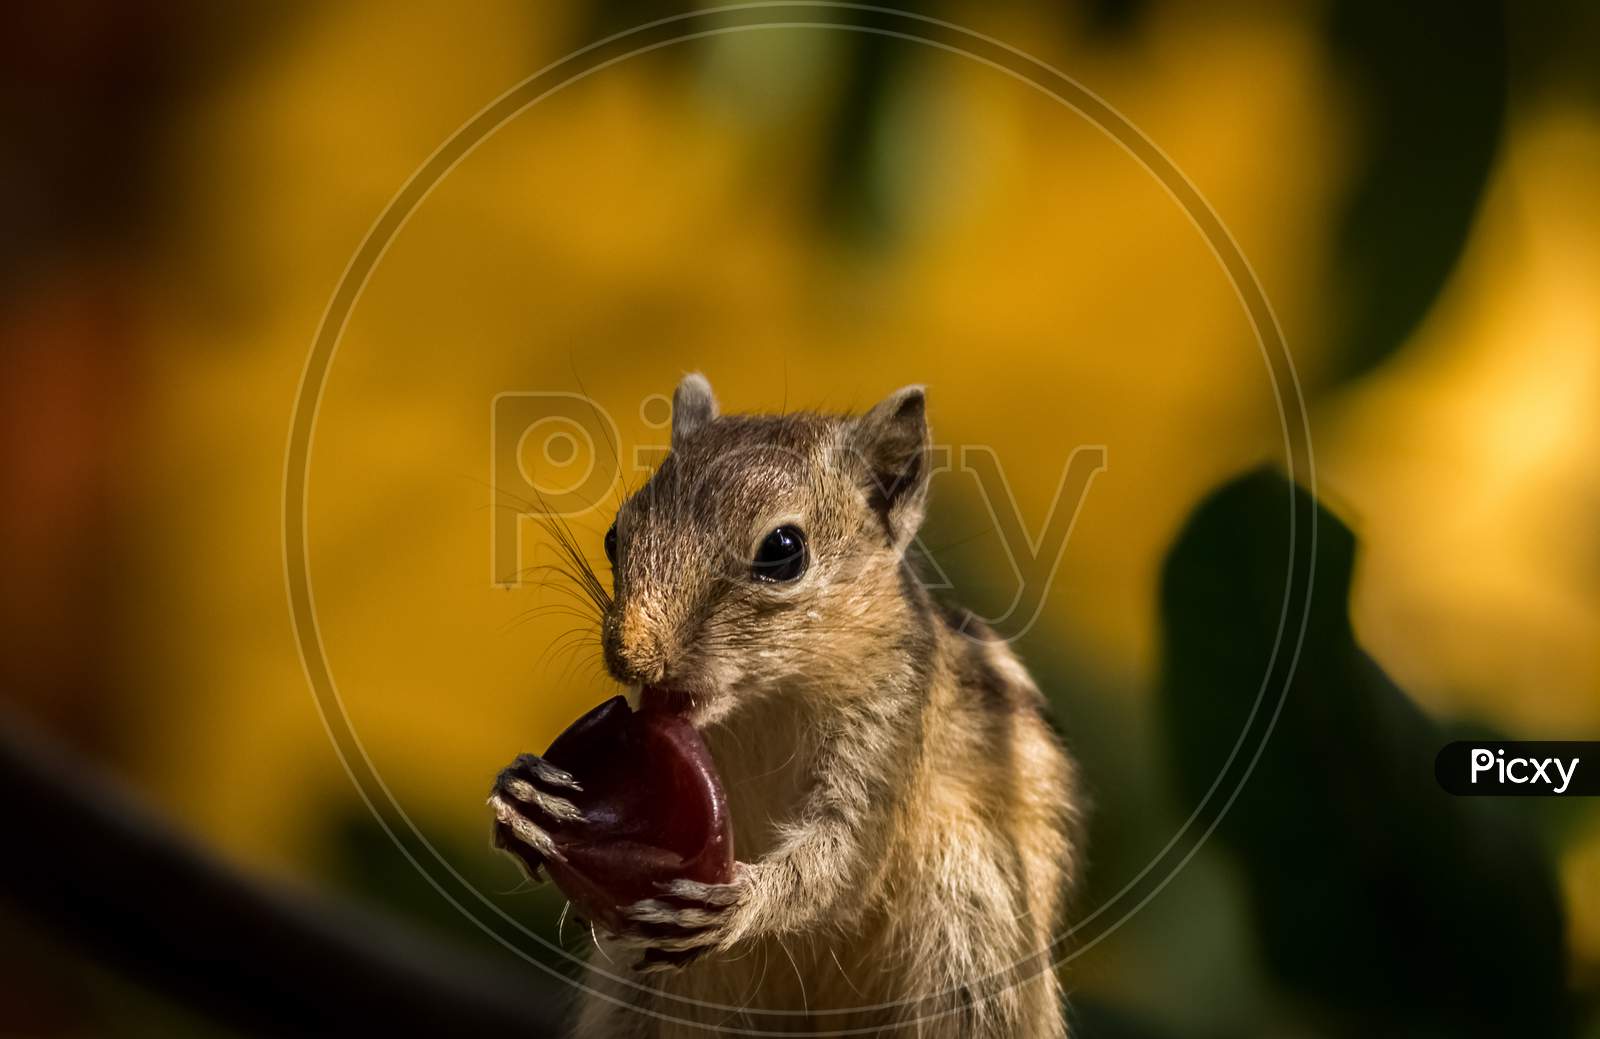 Baby Squirrel Eating Fruit. Cute Indian Palm Squirrel Stock Images.